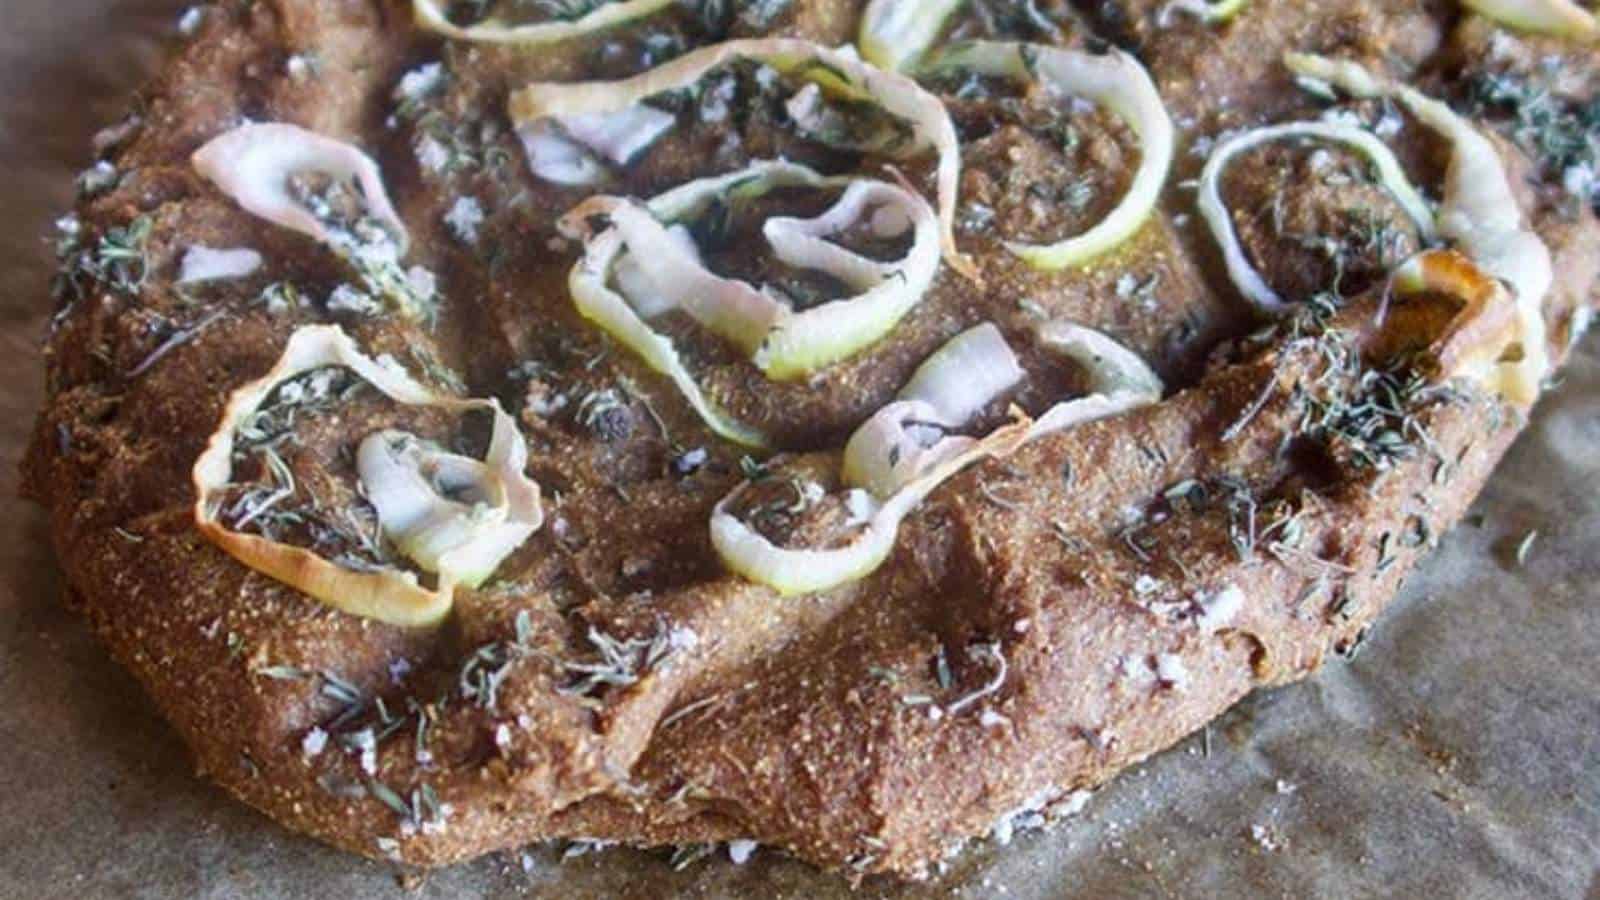 Close-up of a homemade focaccia bread with onions and herbs on a textured surface.